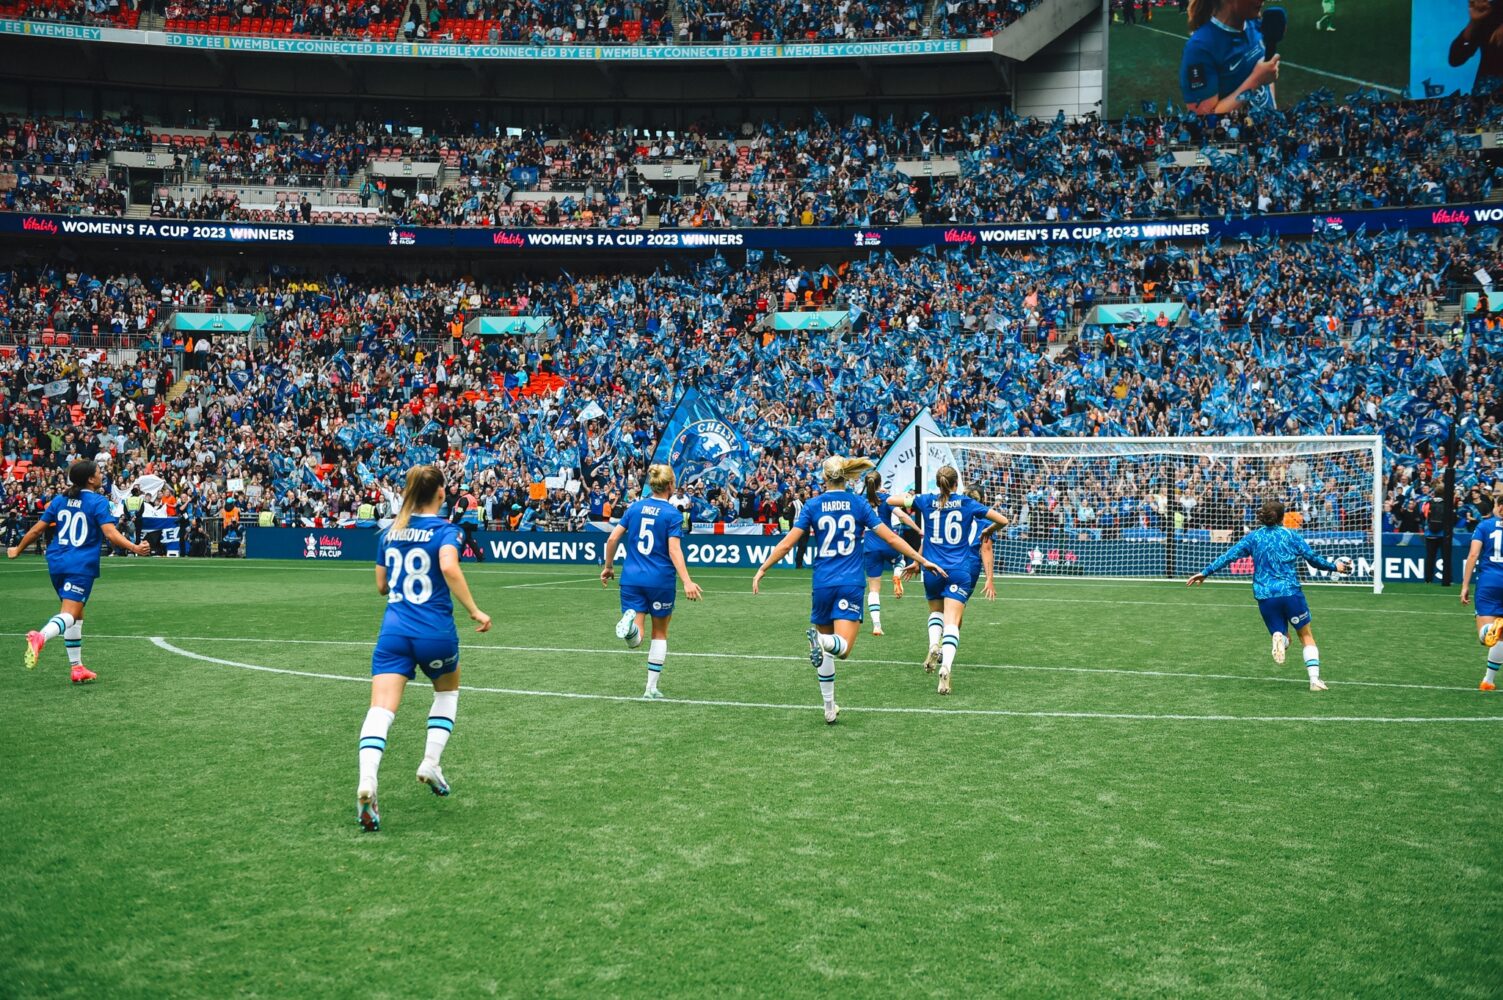 The Chelsea FC Women's team run towards fans in the crowd after winning the 2023 Women's FA Cup.